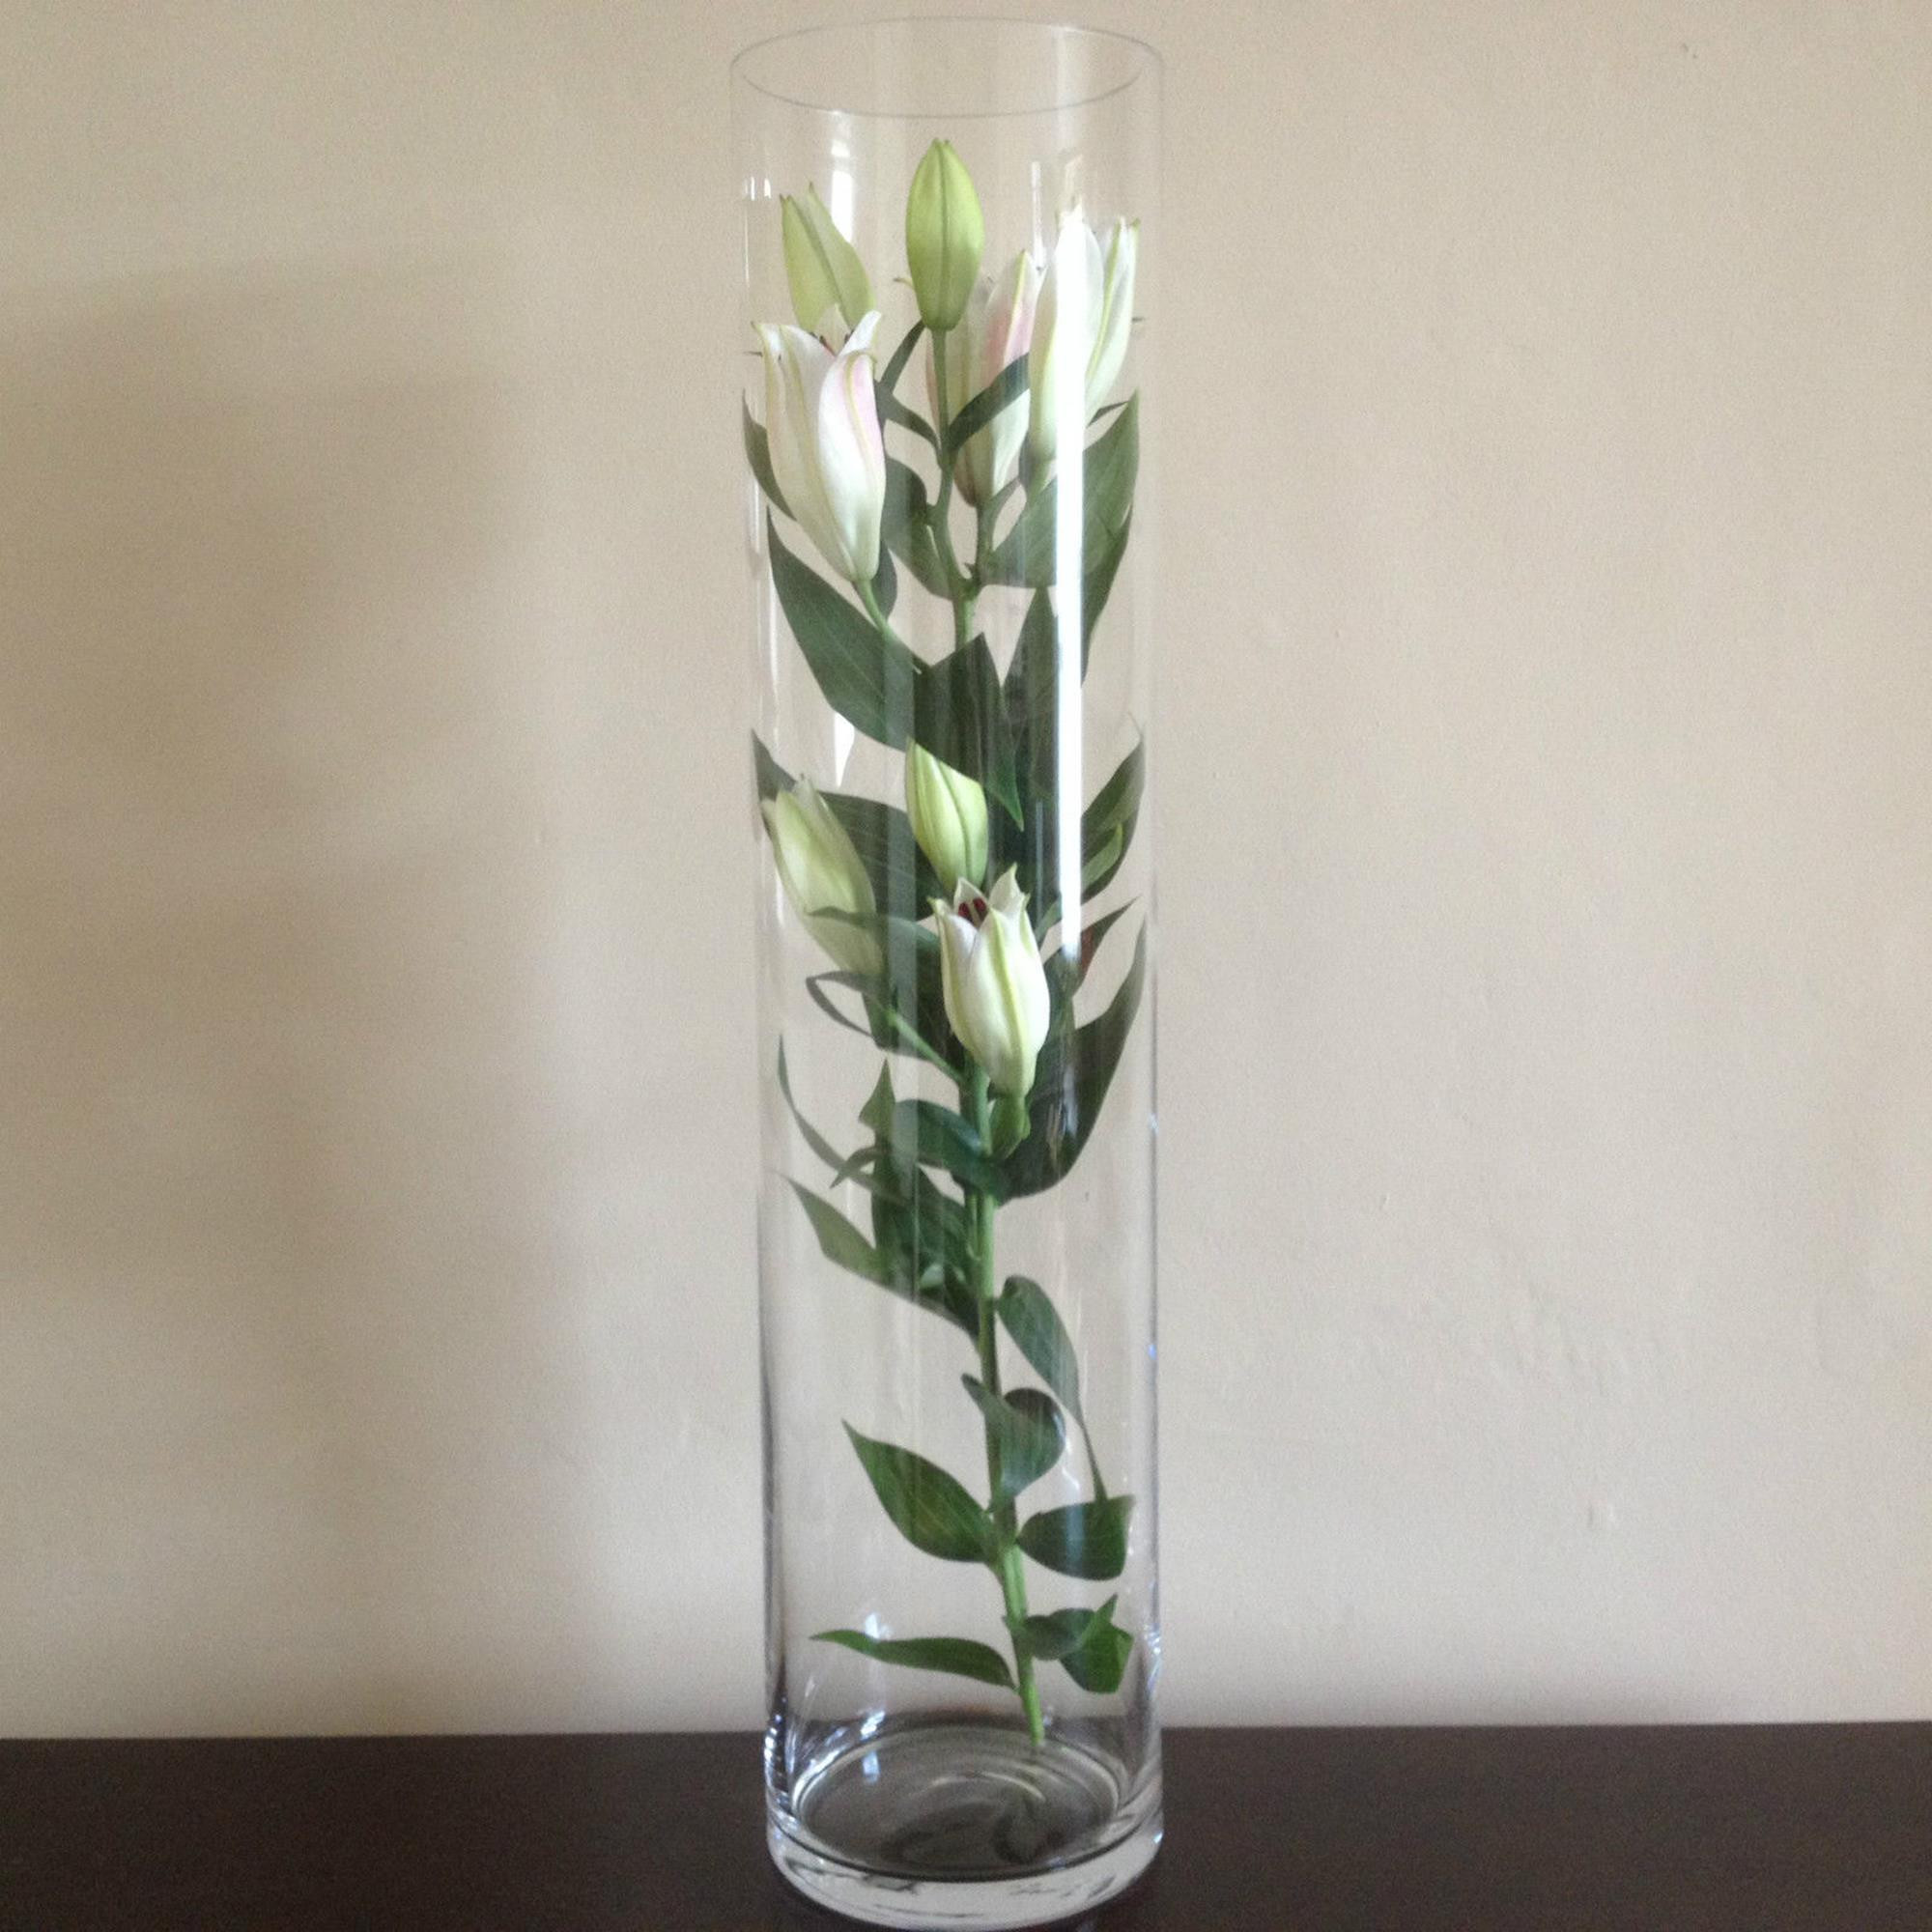 23 Stunning How to Make Floating Flowers In Vase 2024 free download how to make floating flowers in vase of floor vases with branches floor vase ideas tall floor vases tall inside 37 beautiful tall clear vase centerpiece ideas its home ideas